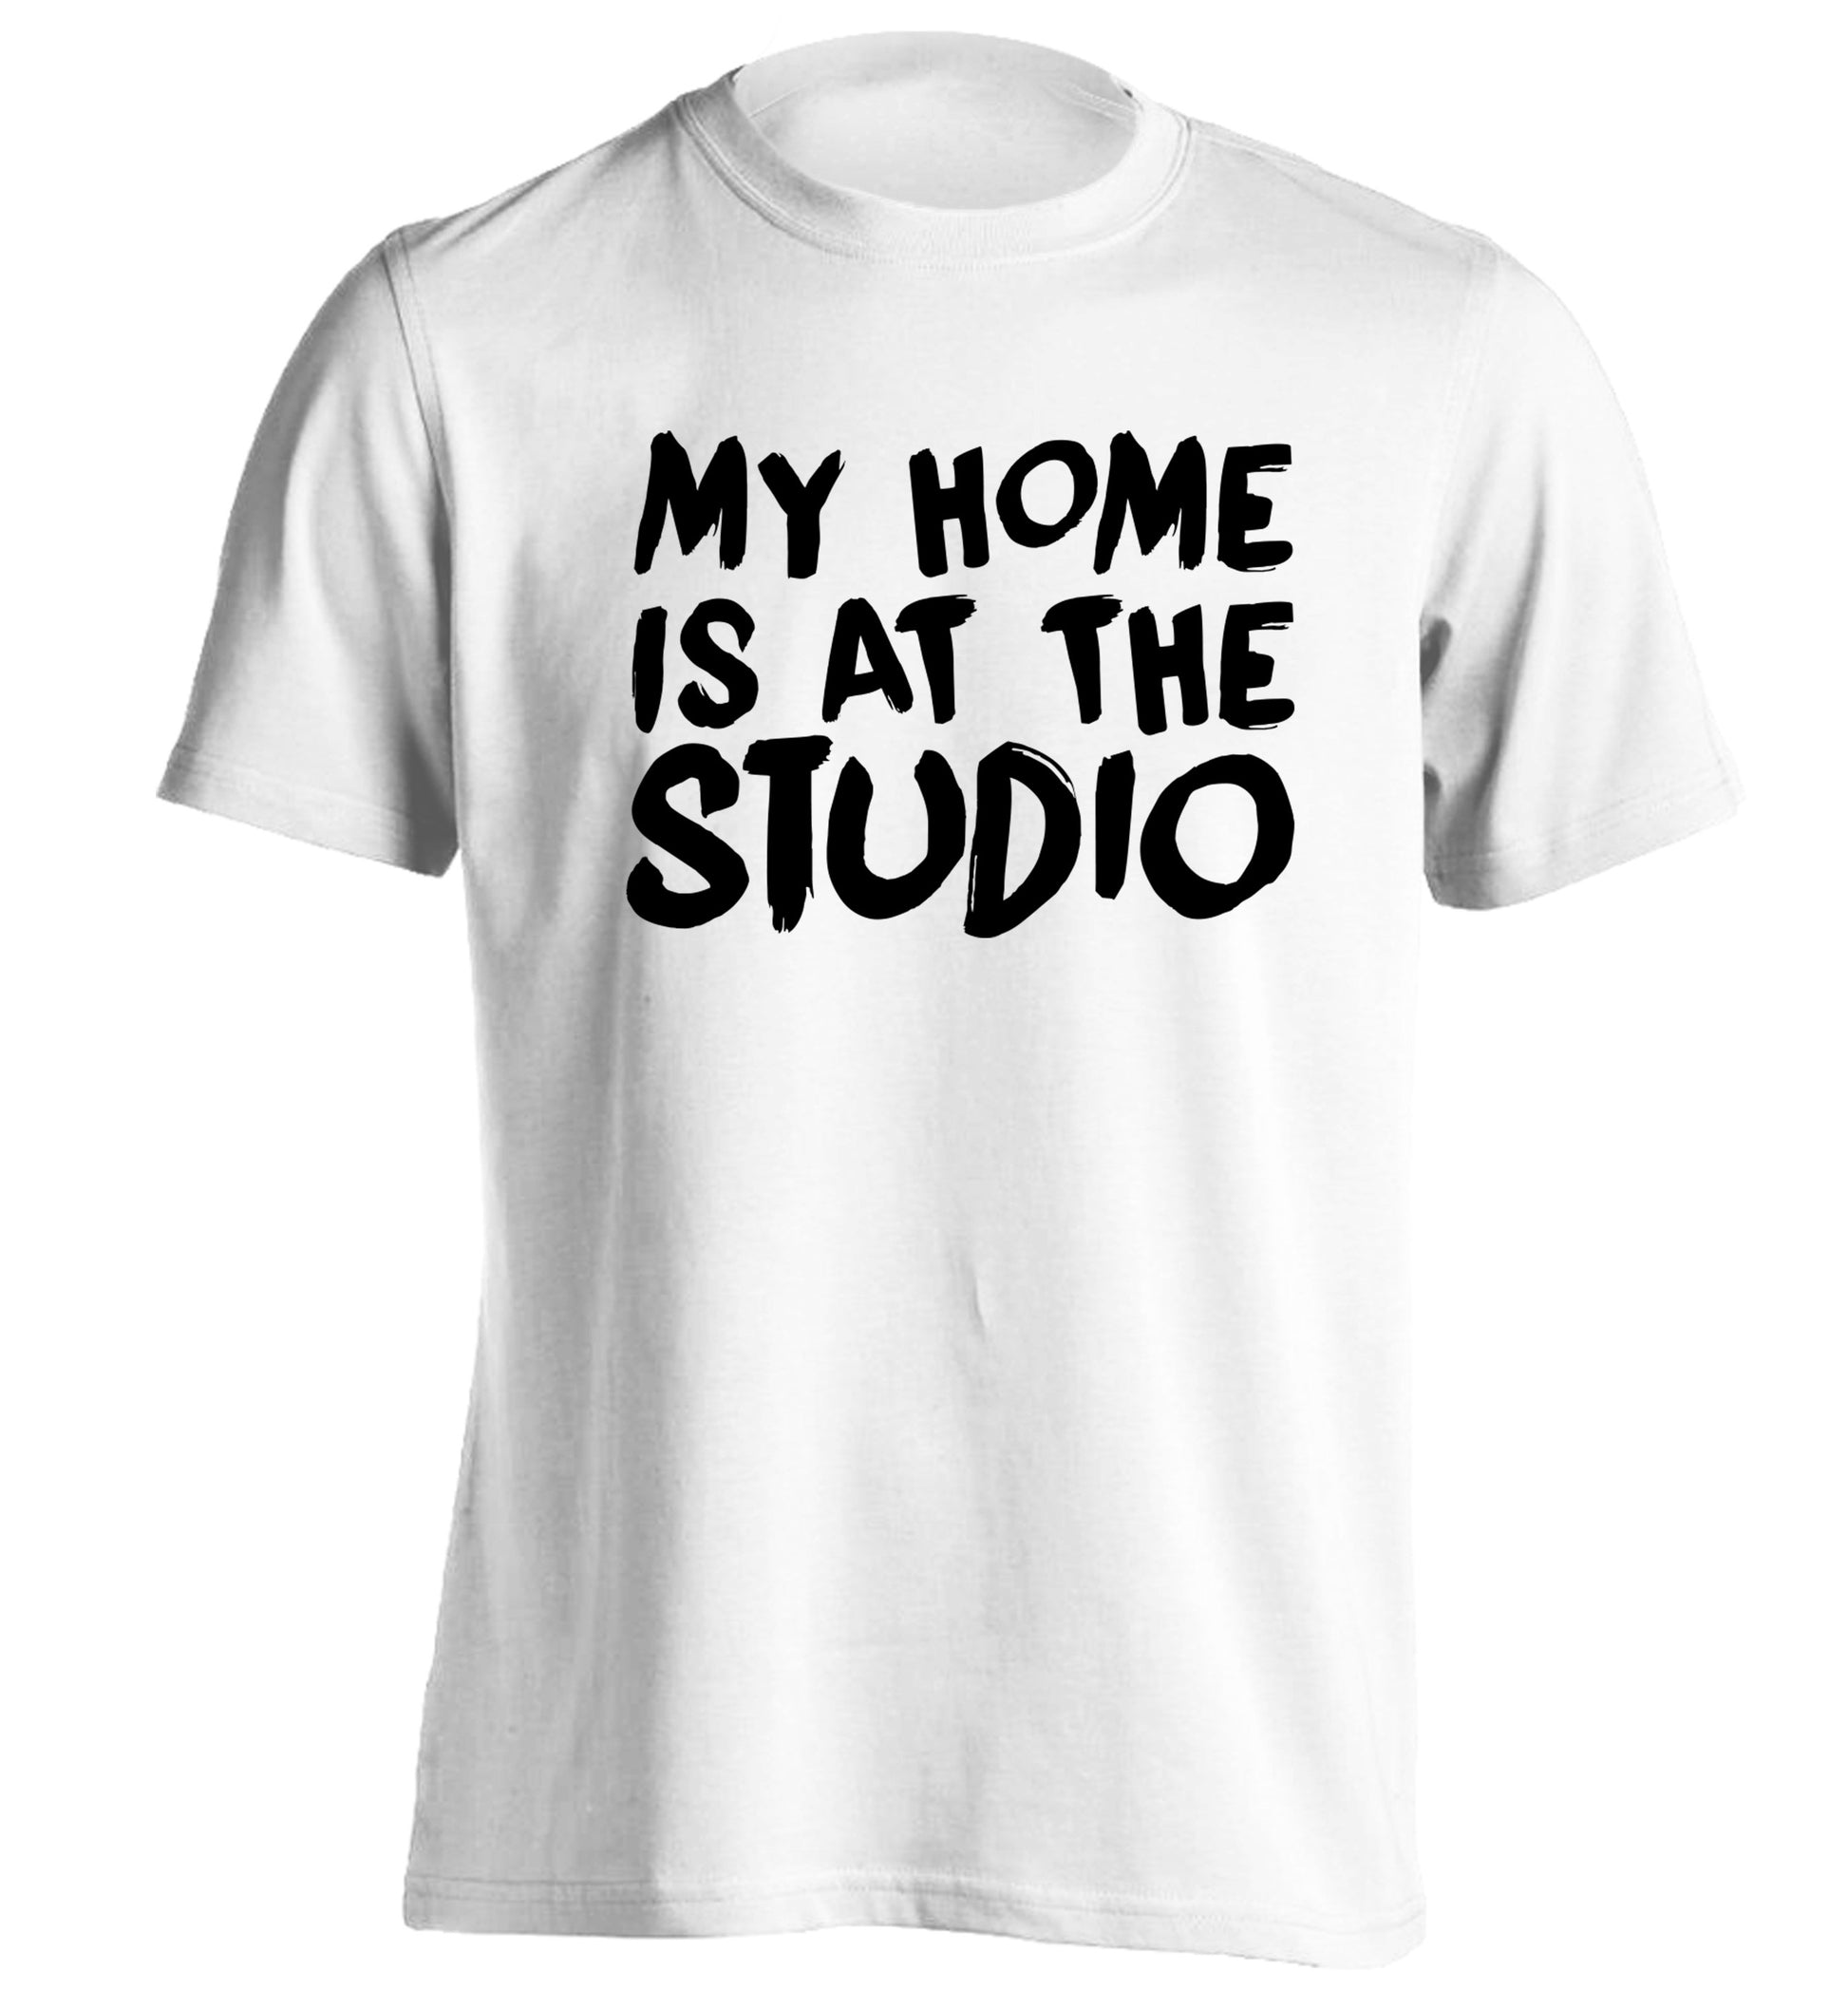 My home is at the studio adults unisex white Tshirt 2XL